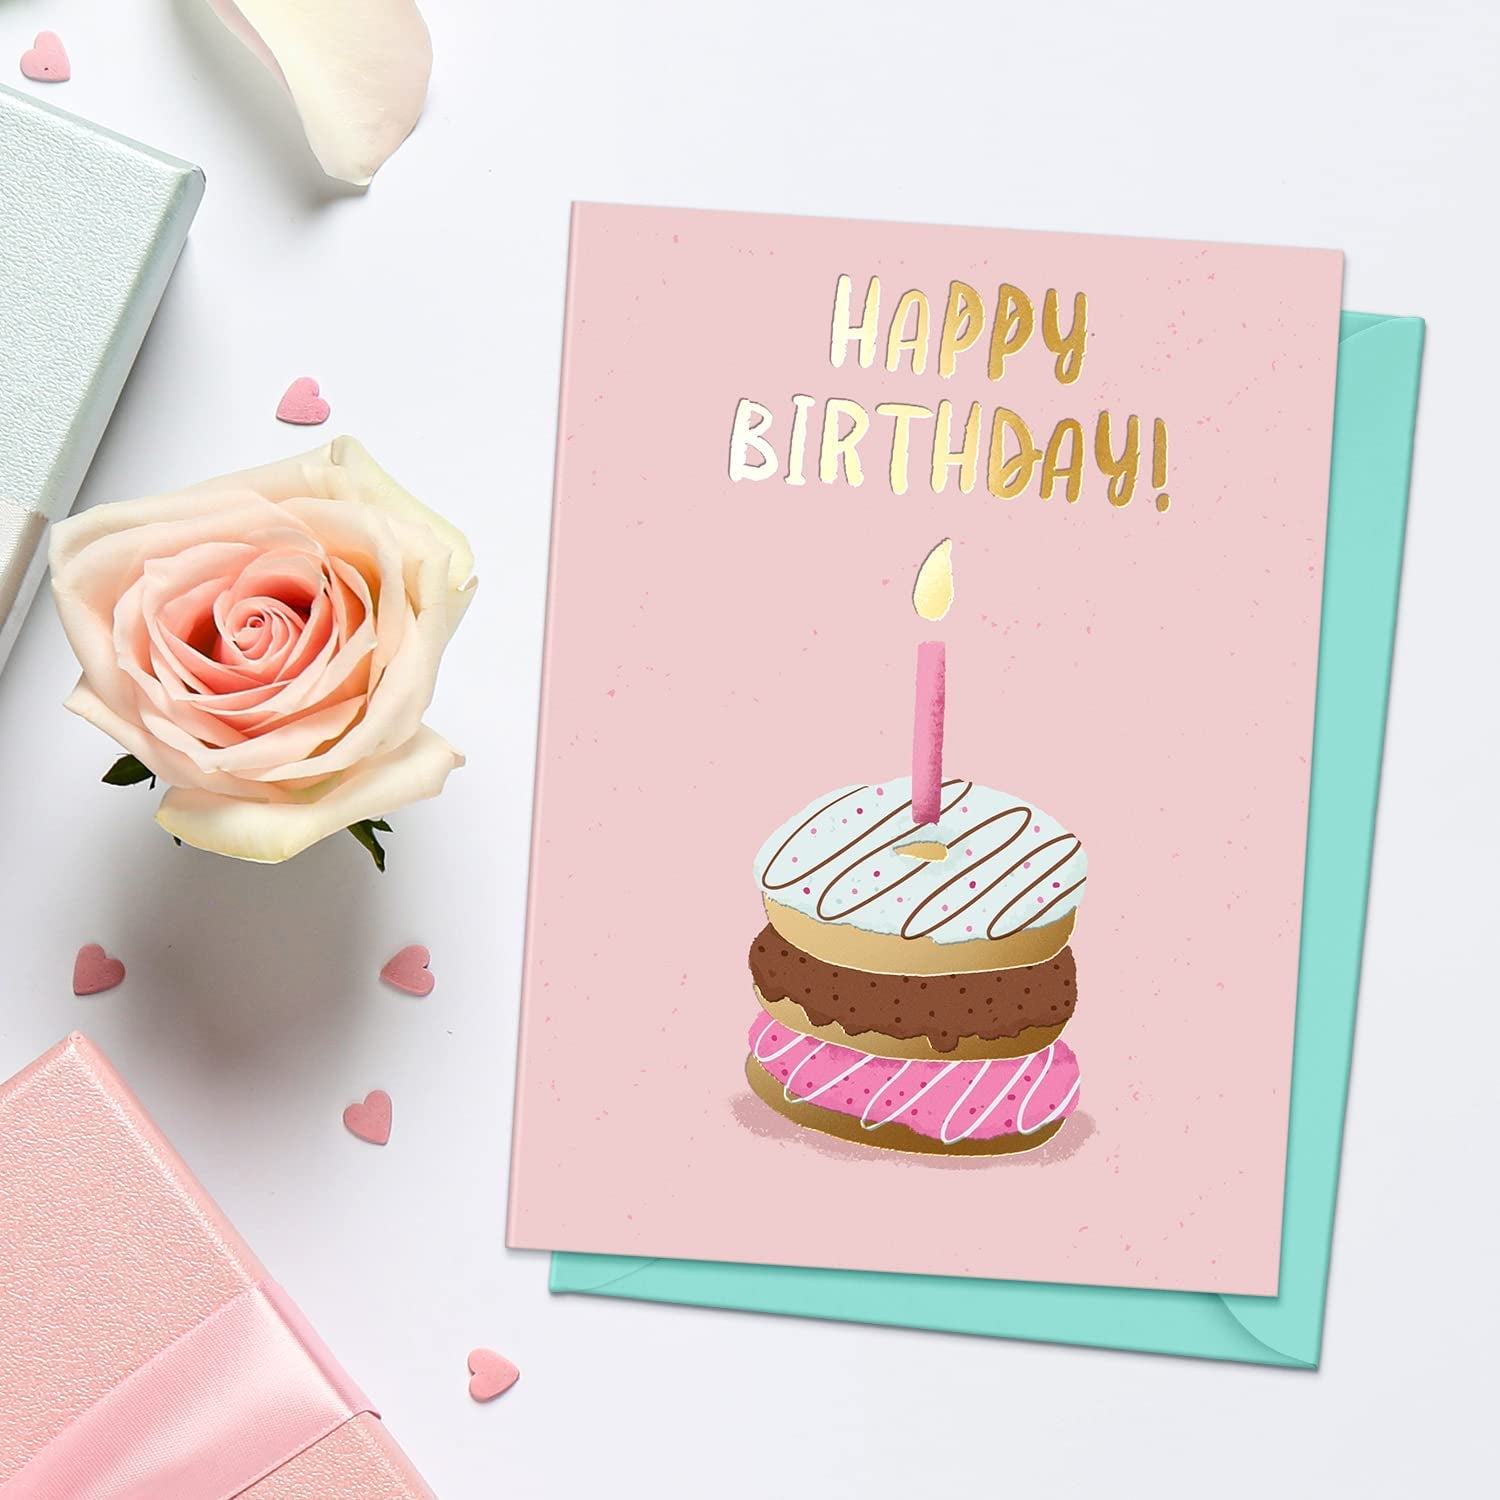 Set of 20 Assorted Birthday Cards with Envelopes